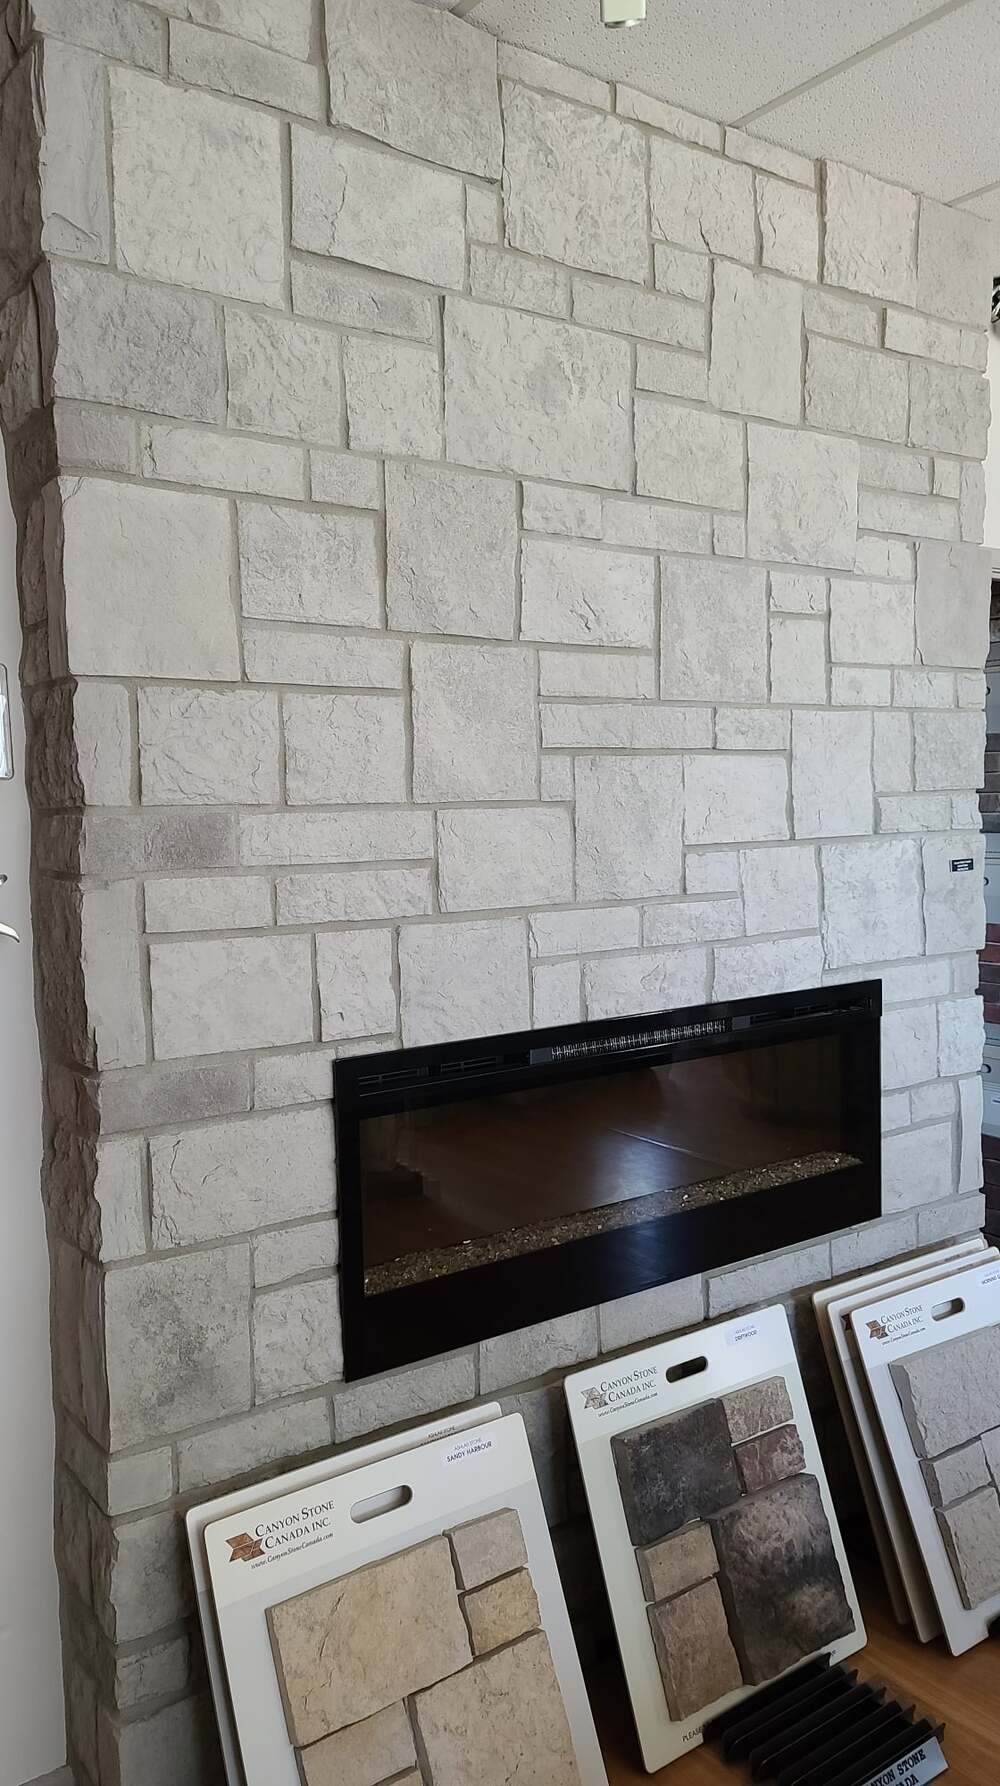 How to organize your living room with a stone fireplace?